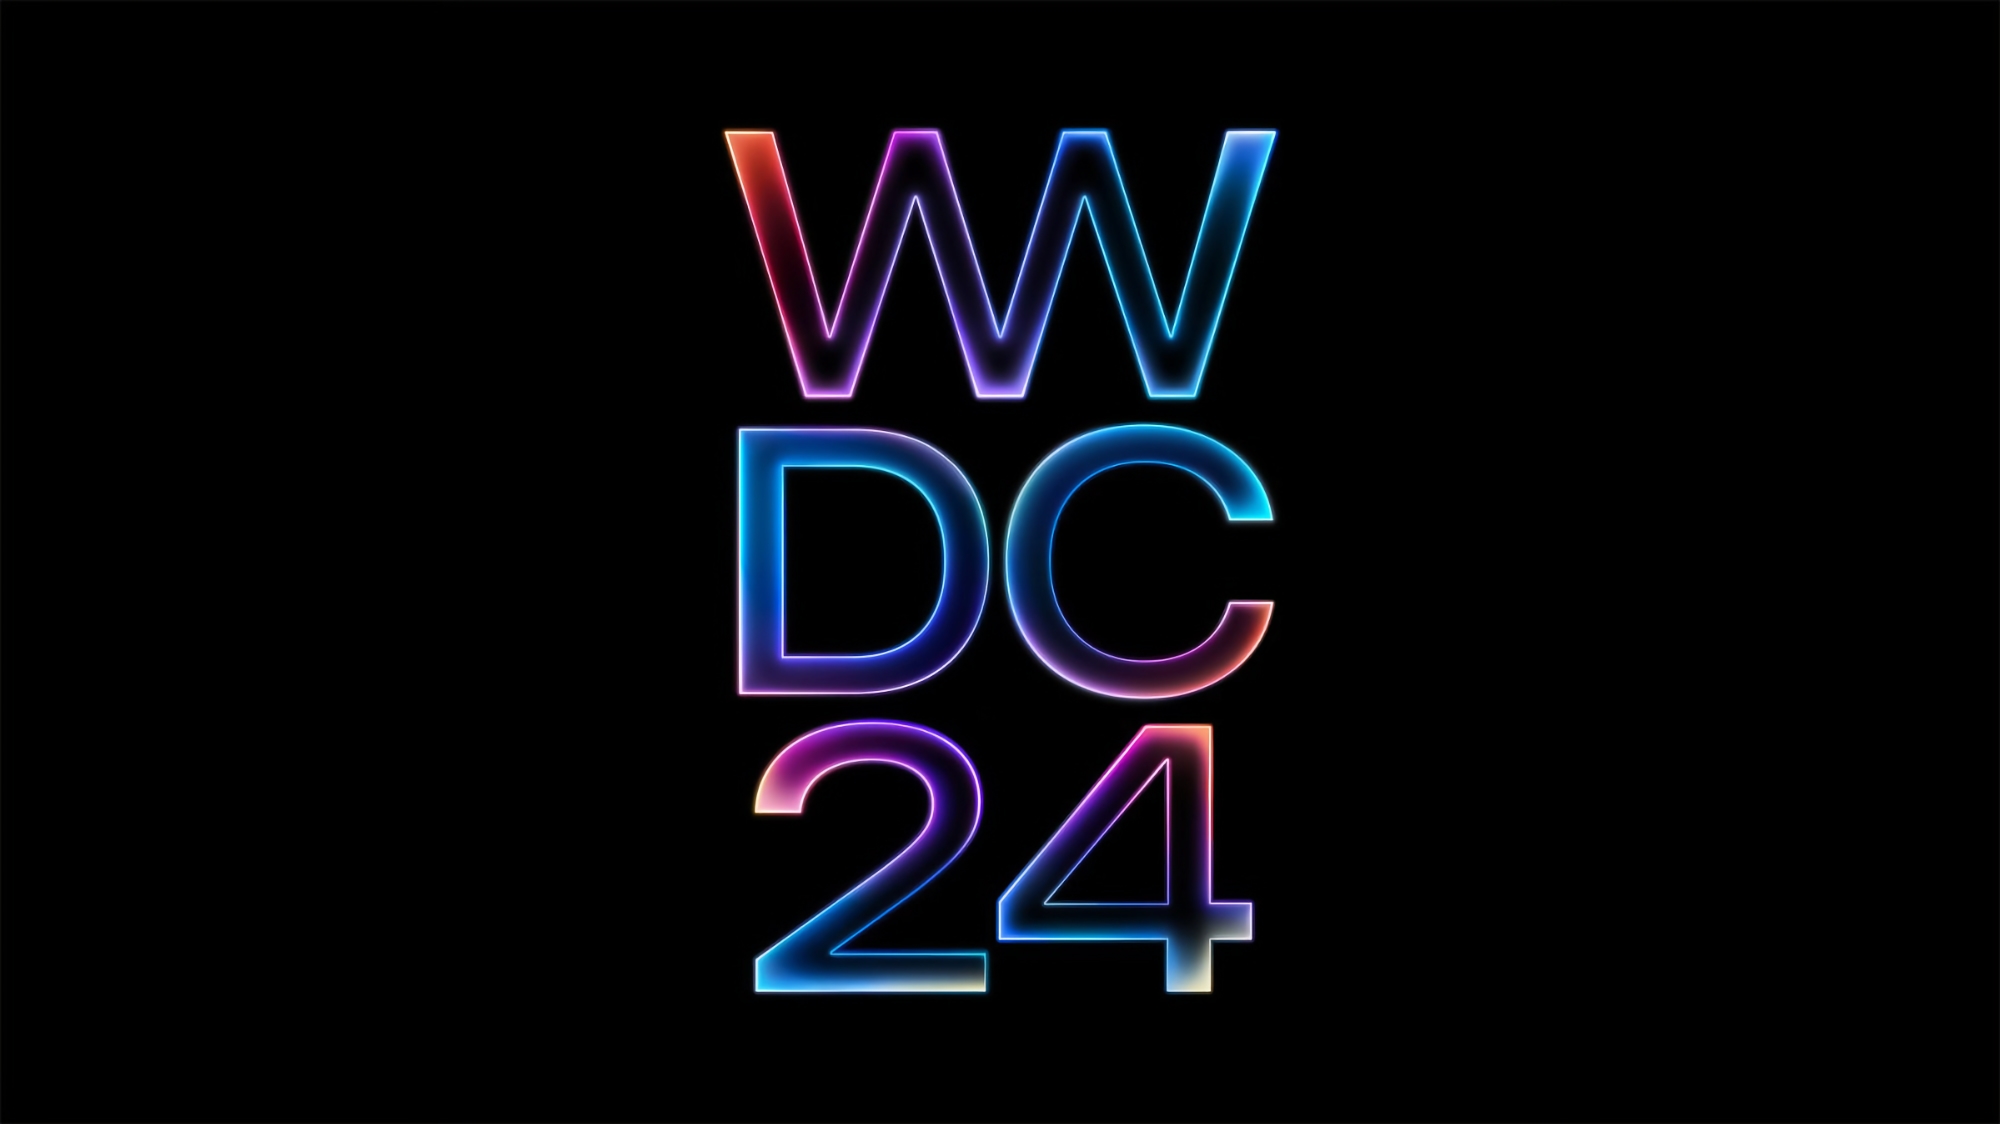 It's official: Apple will hold its WWDC 2024 conference from 10 to 14 June